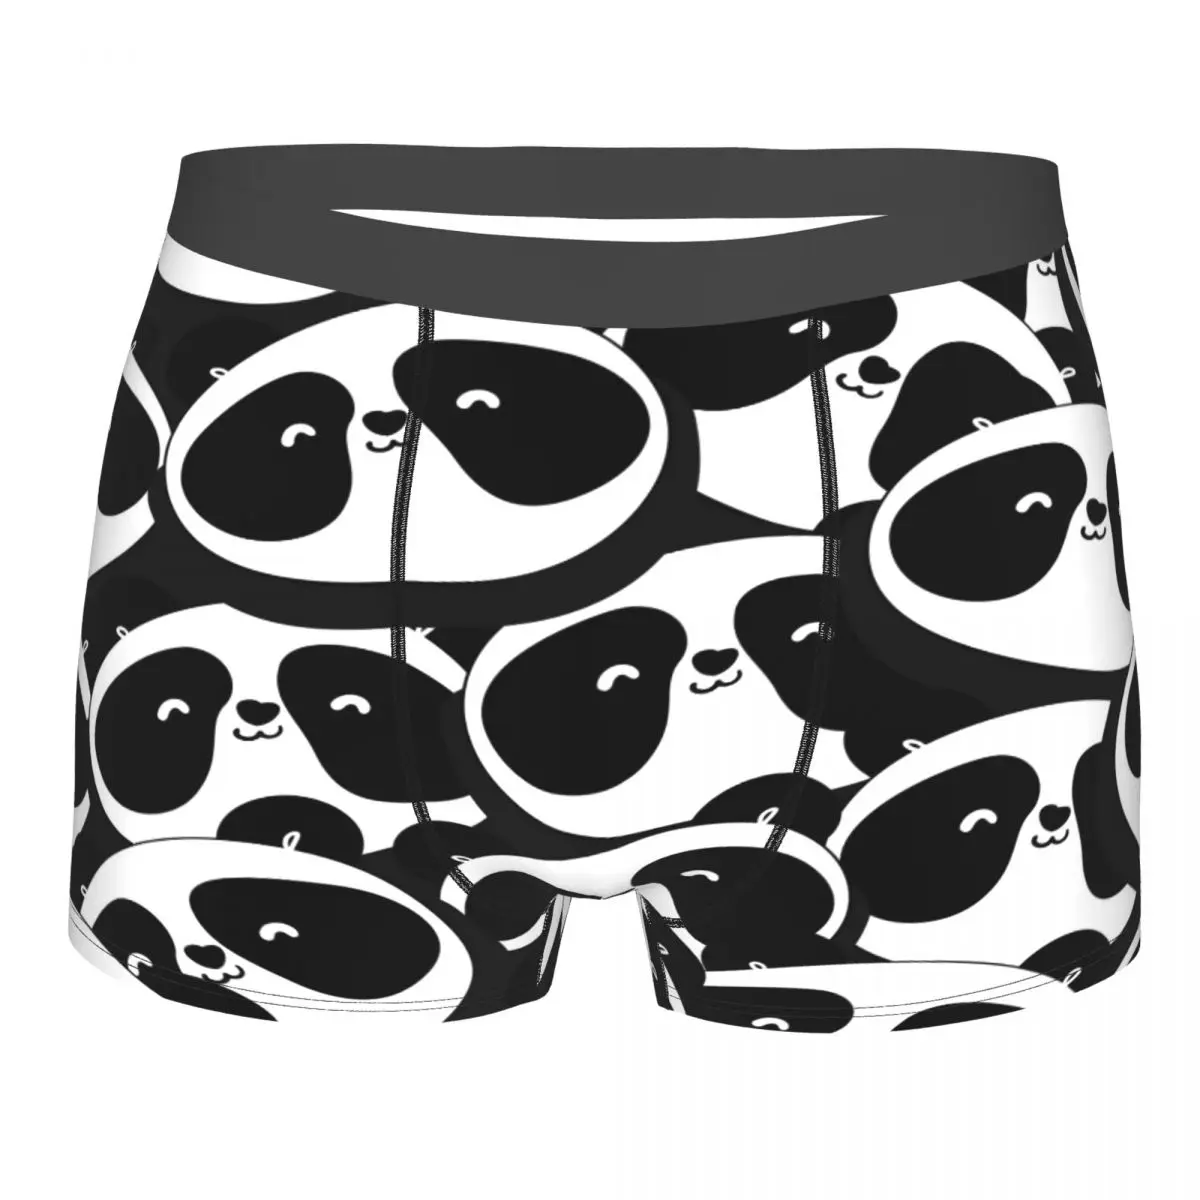 Men's Panties Underpants Boxers Underwear Black And White Panda Heads Sexy Male Shorts